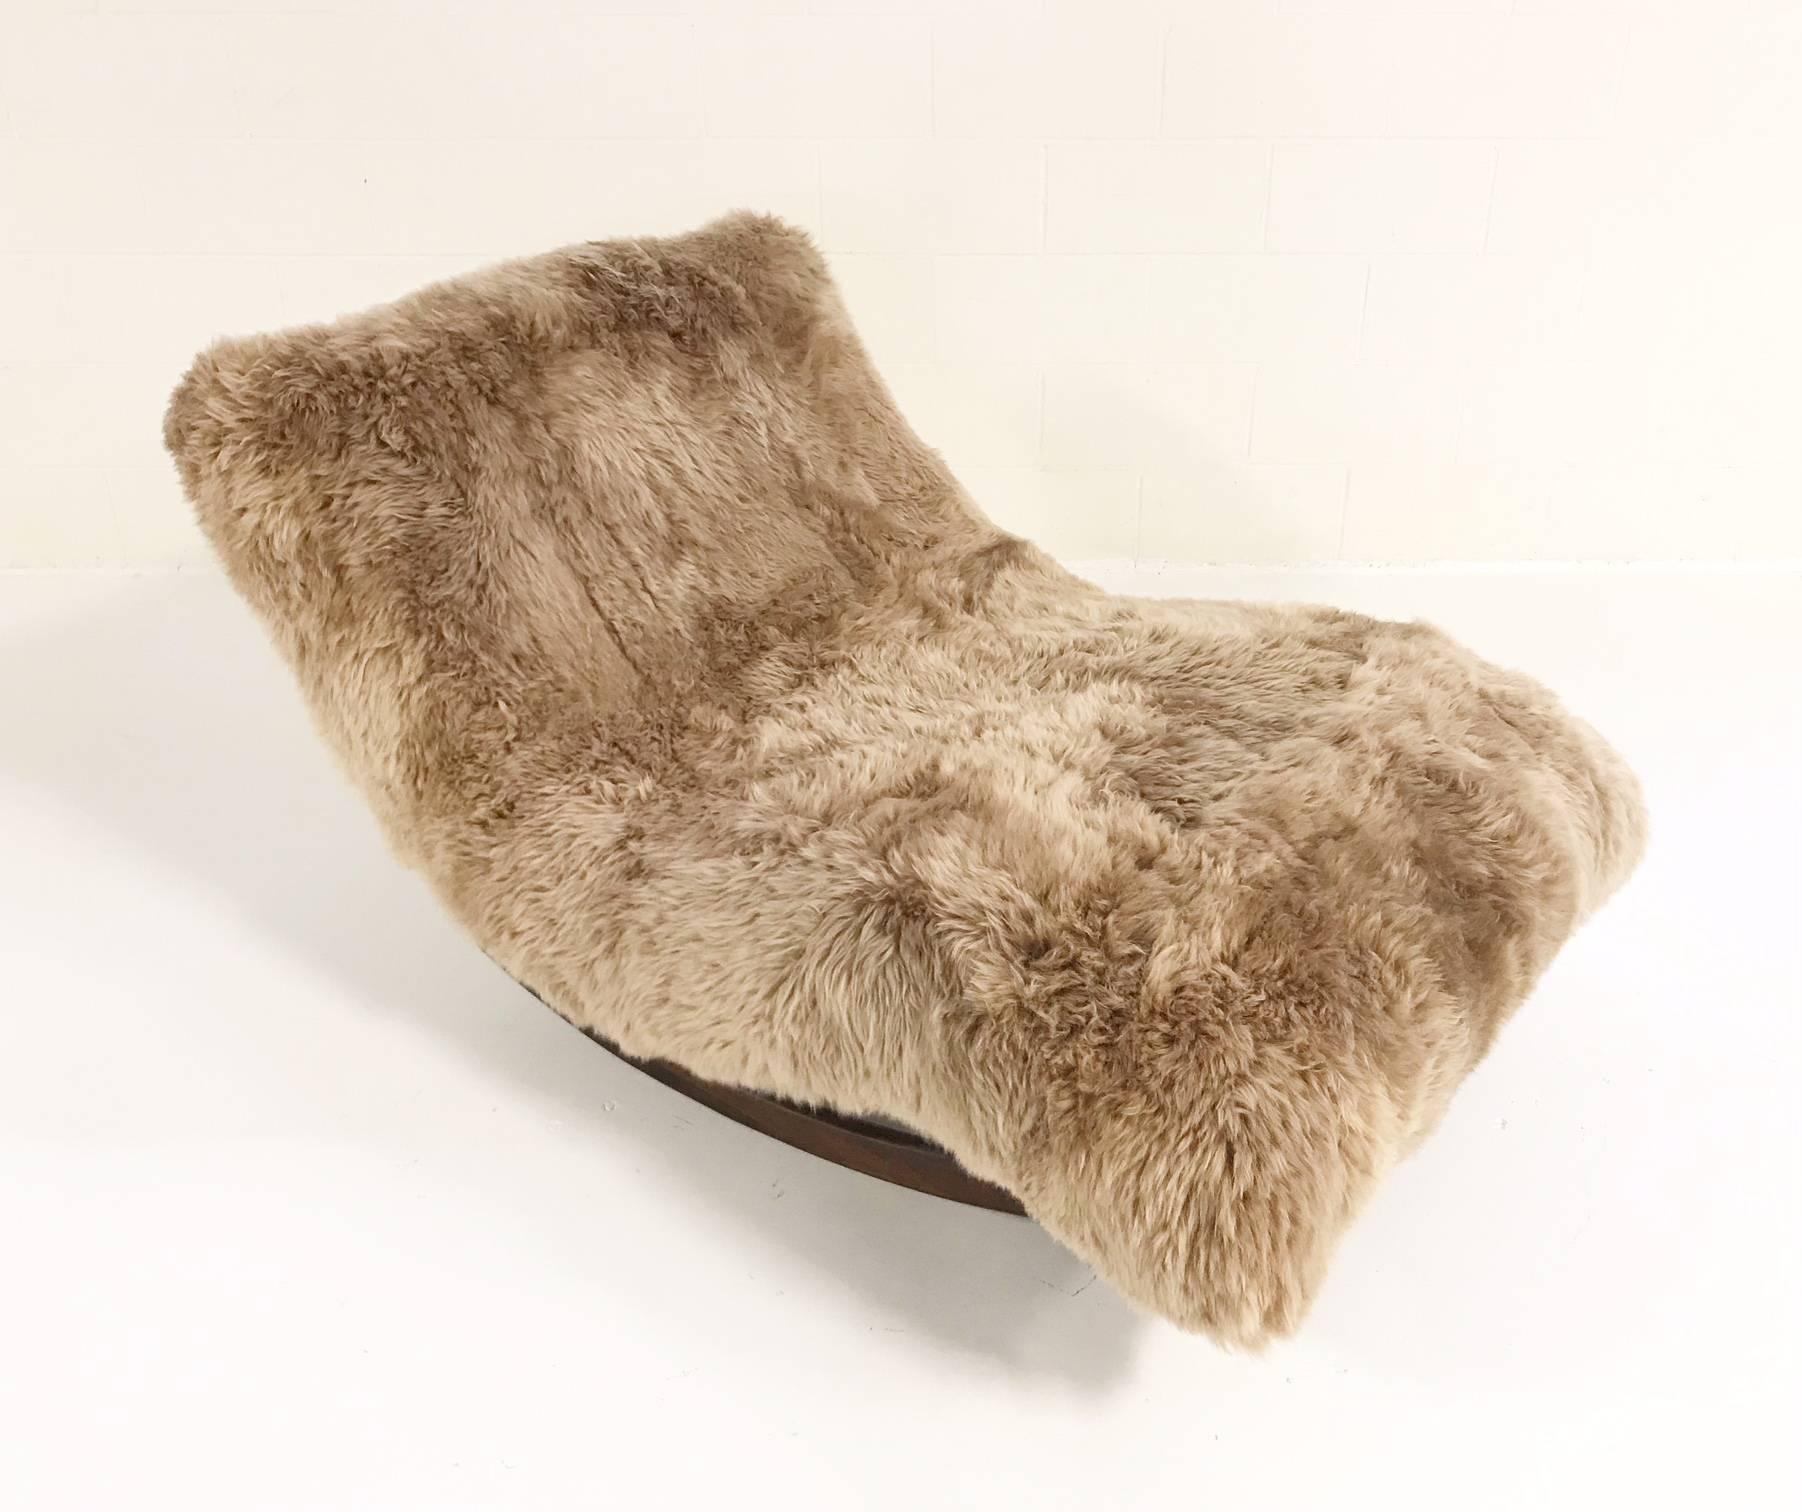 This is an original Adrian Pearsall rocking wave chaise lounge. Adrian Pearsall began his career as an architect but dabbled in furniture design, quickly becoming a leader in the modernist furniture movement. We upholstered the lounge in our thick